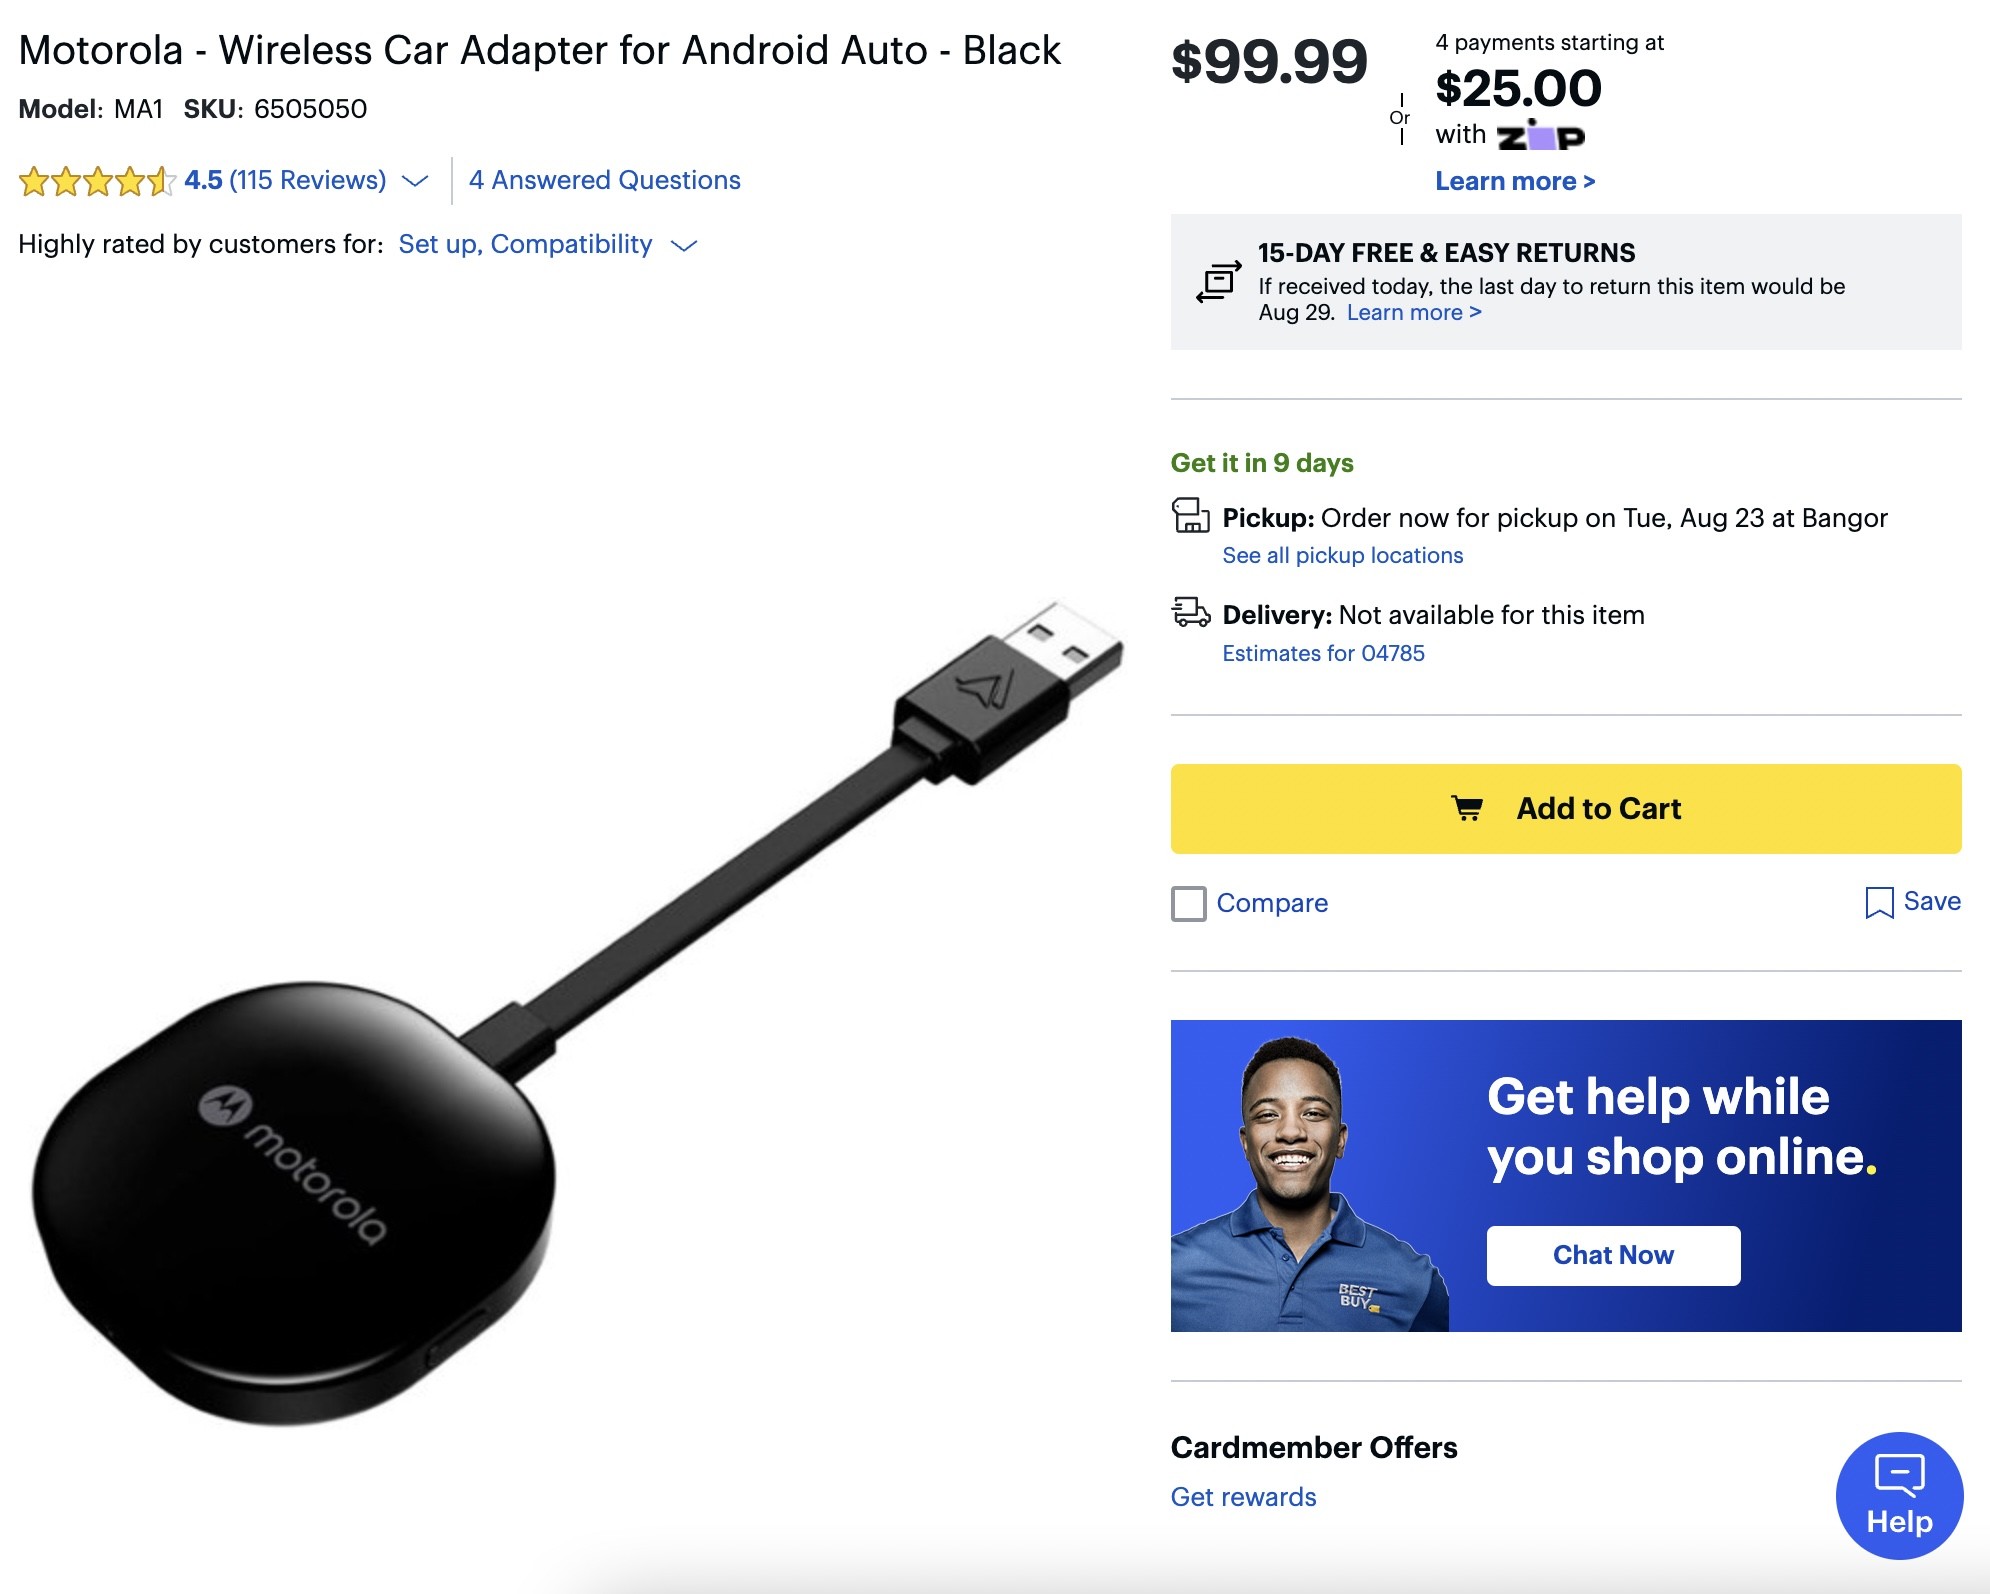 Popular Android Auto Wireless Adapter Now More Expensive Because